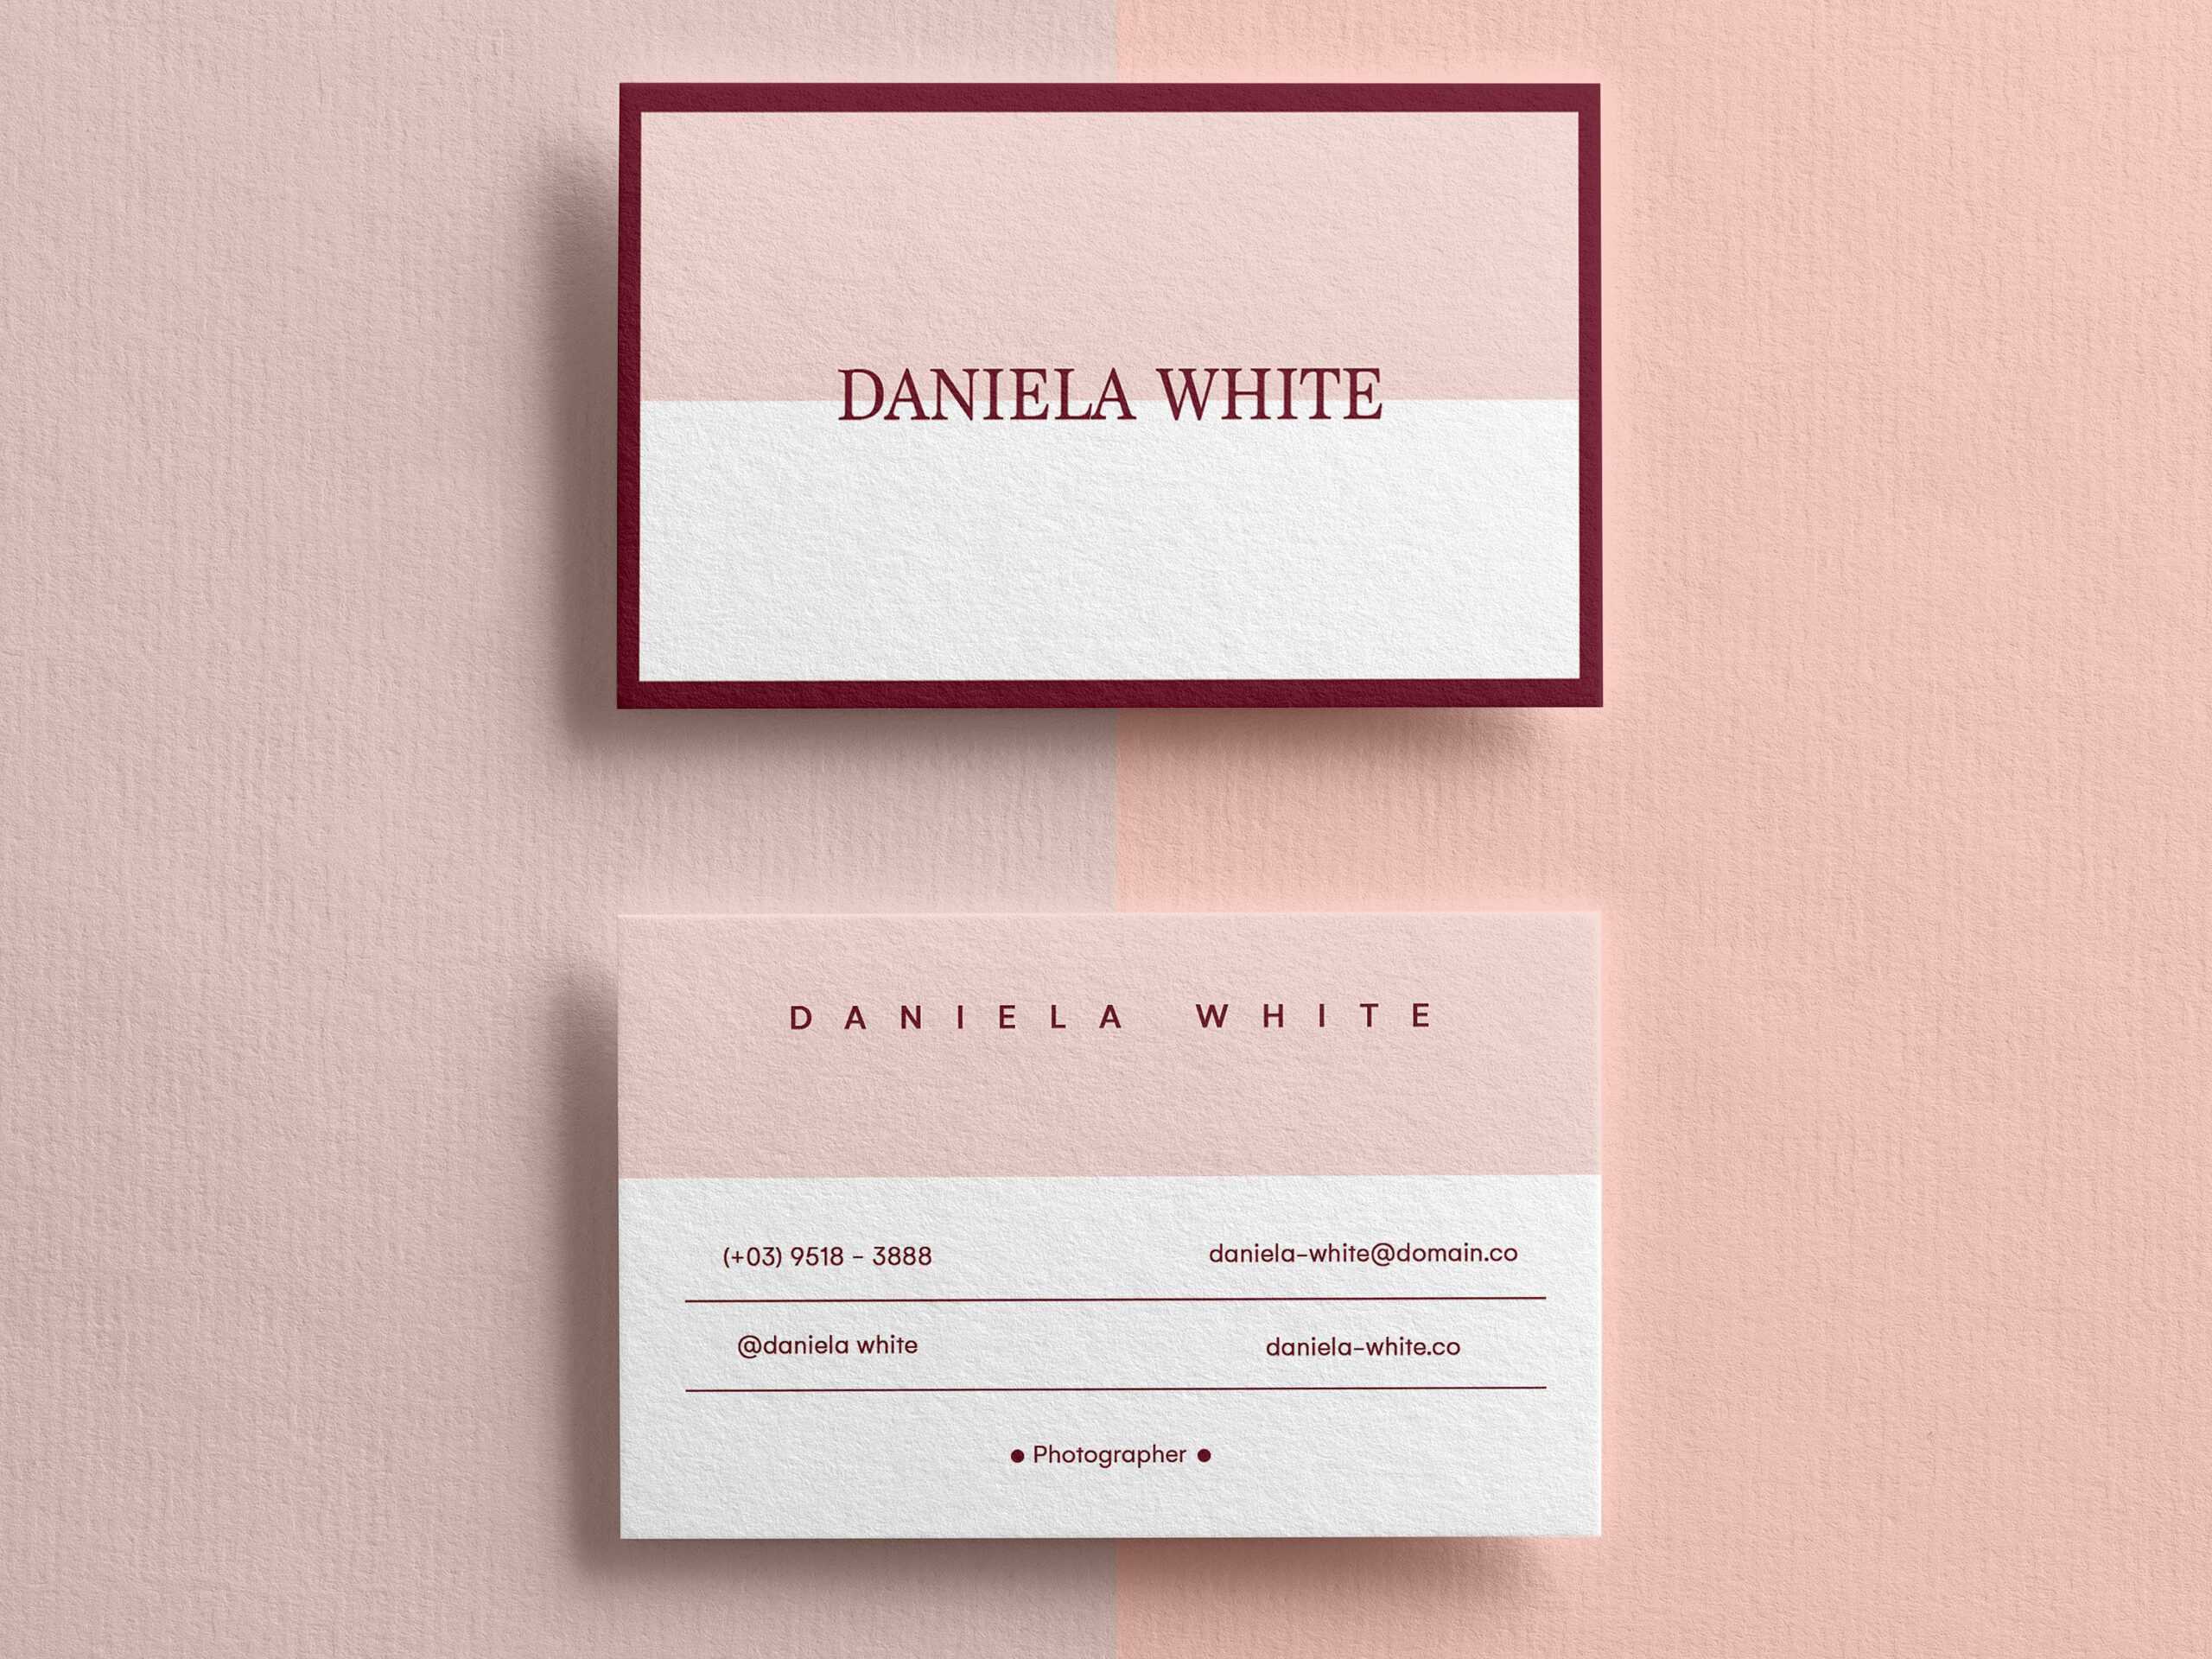 008 Business Card Template Photoshop Fascinating Ideas Blank Within Business Card Template Photoshop Cs6